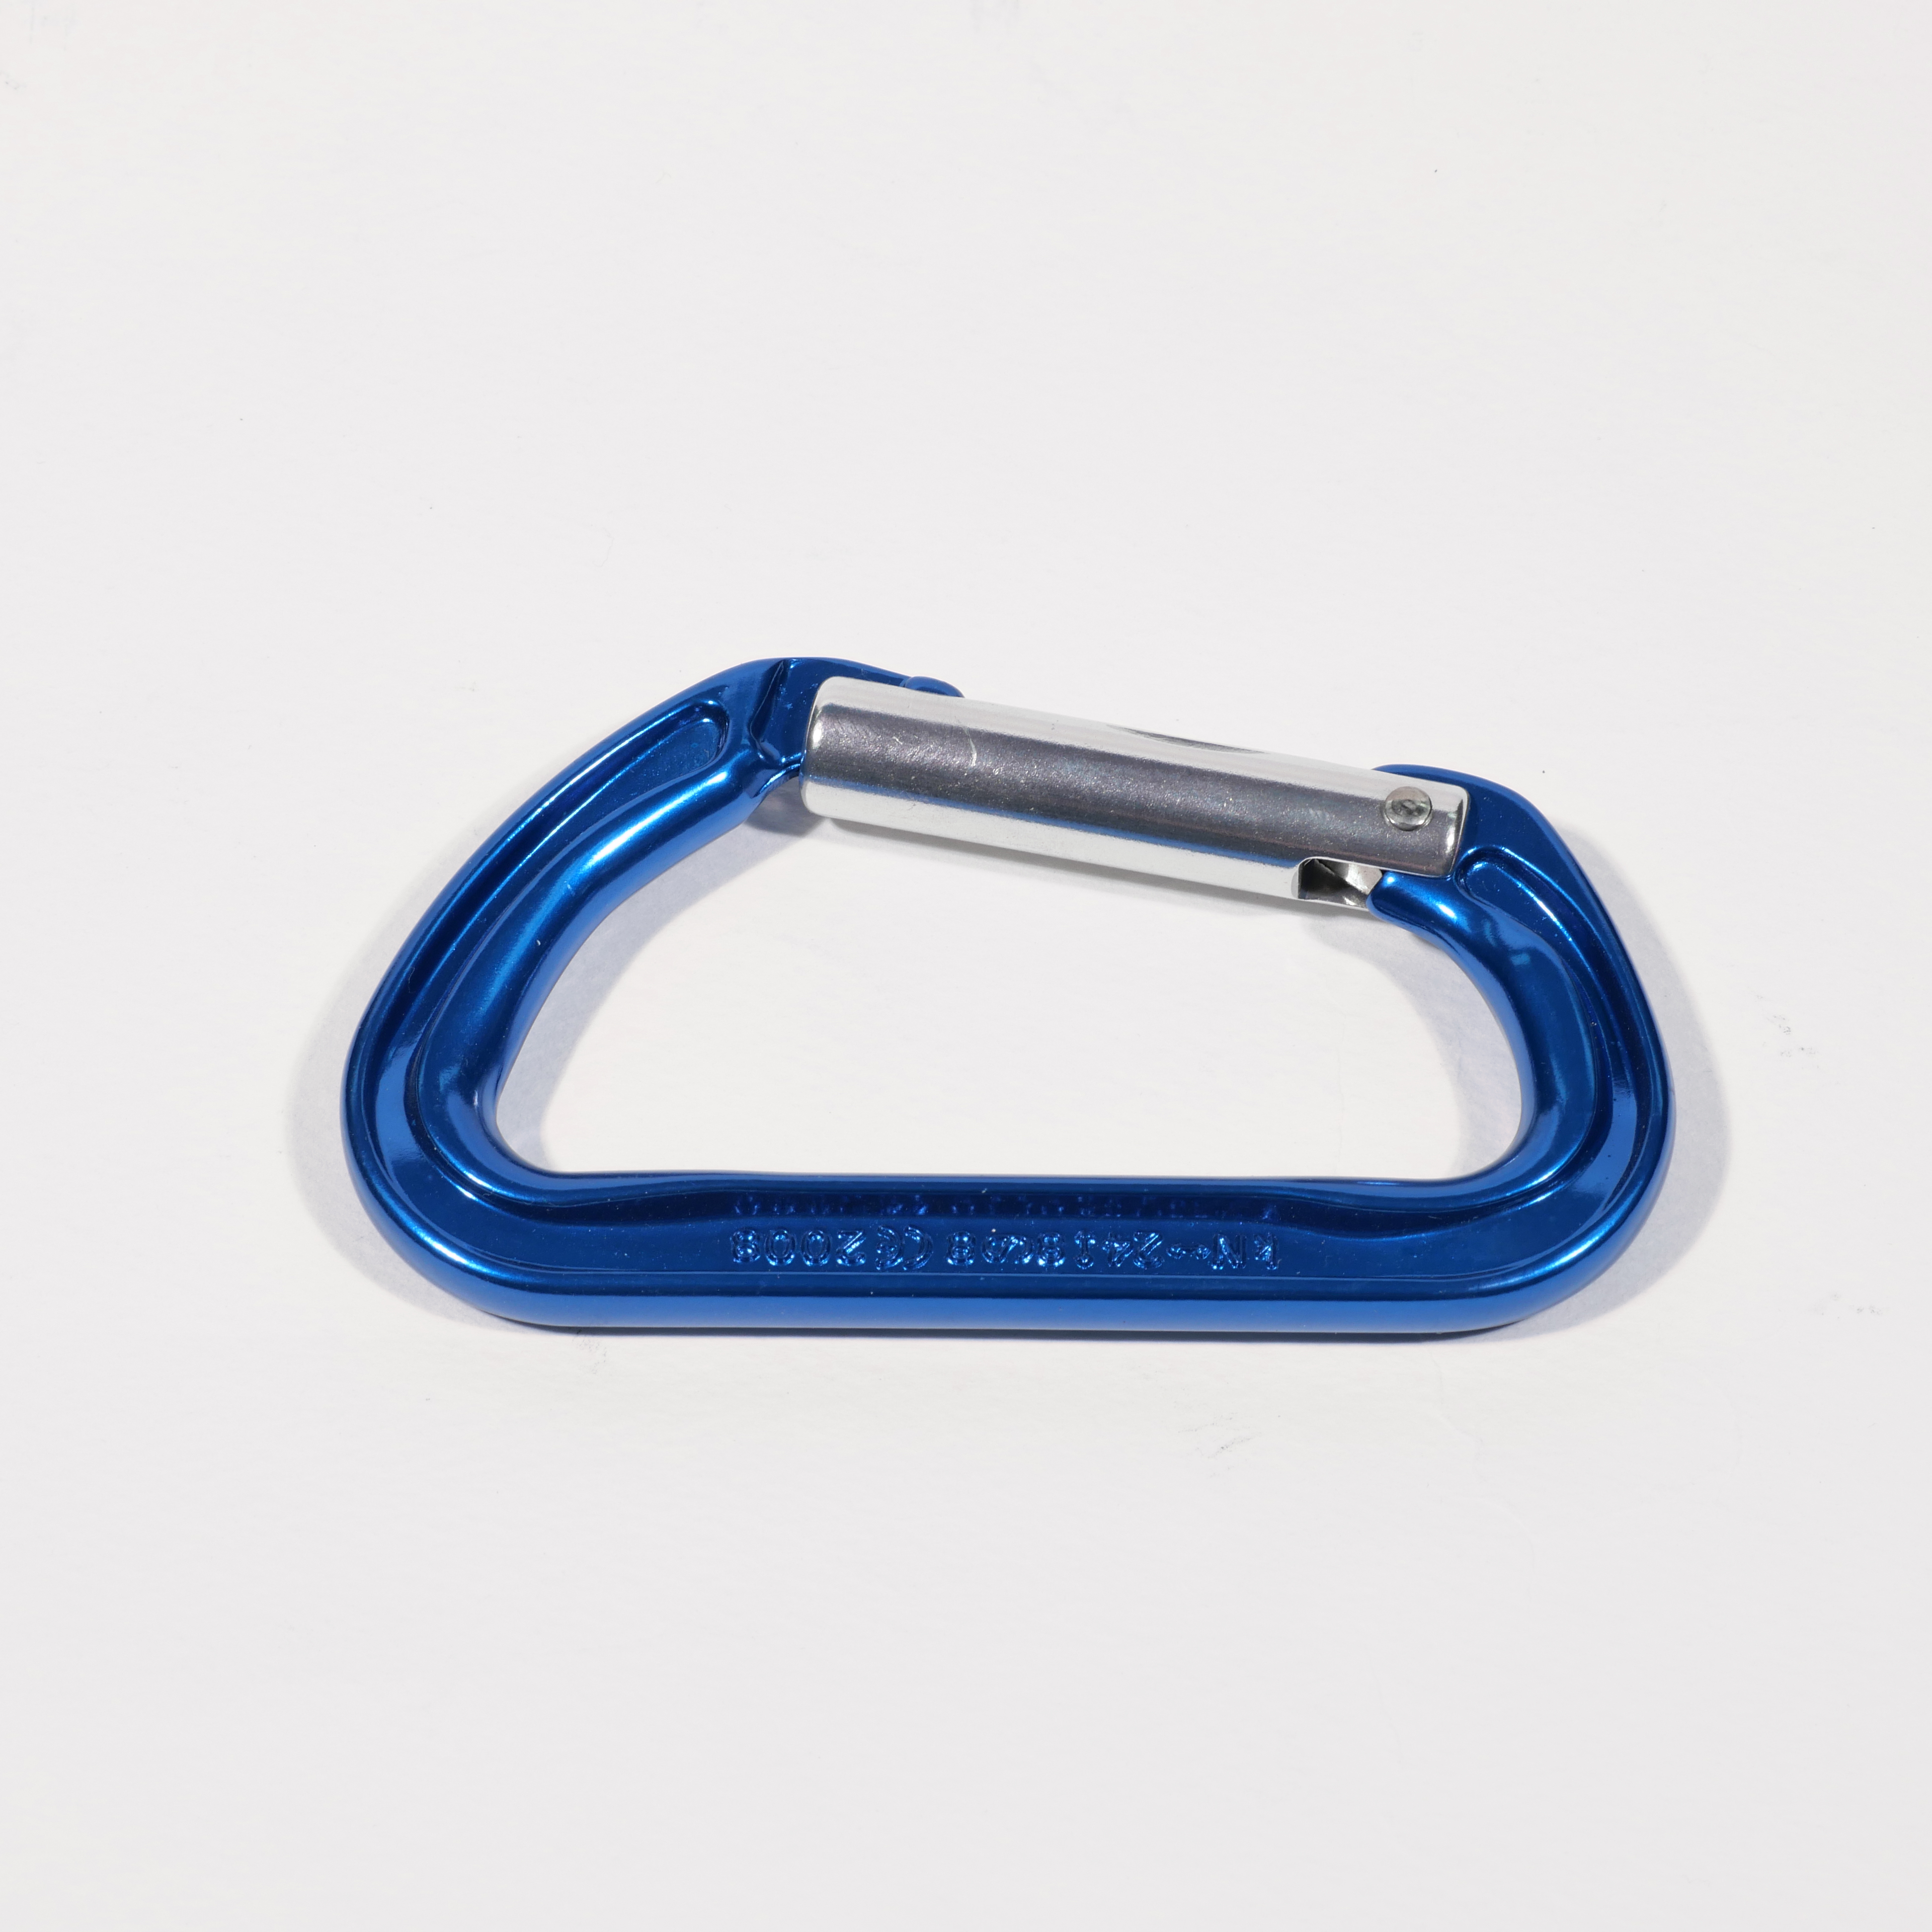 [TO] Carabiner